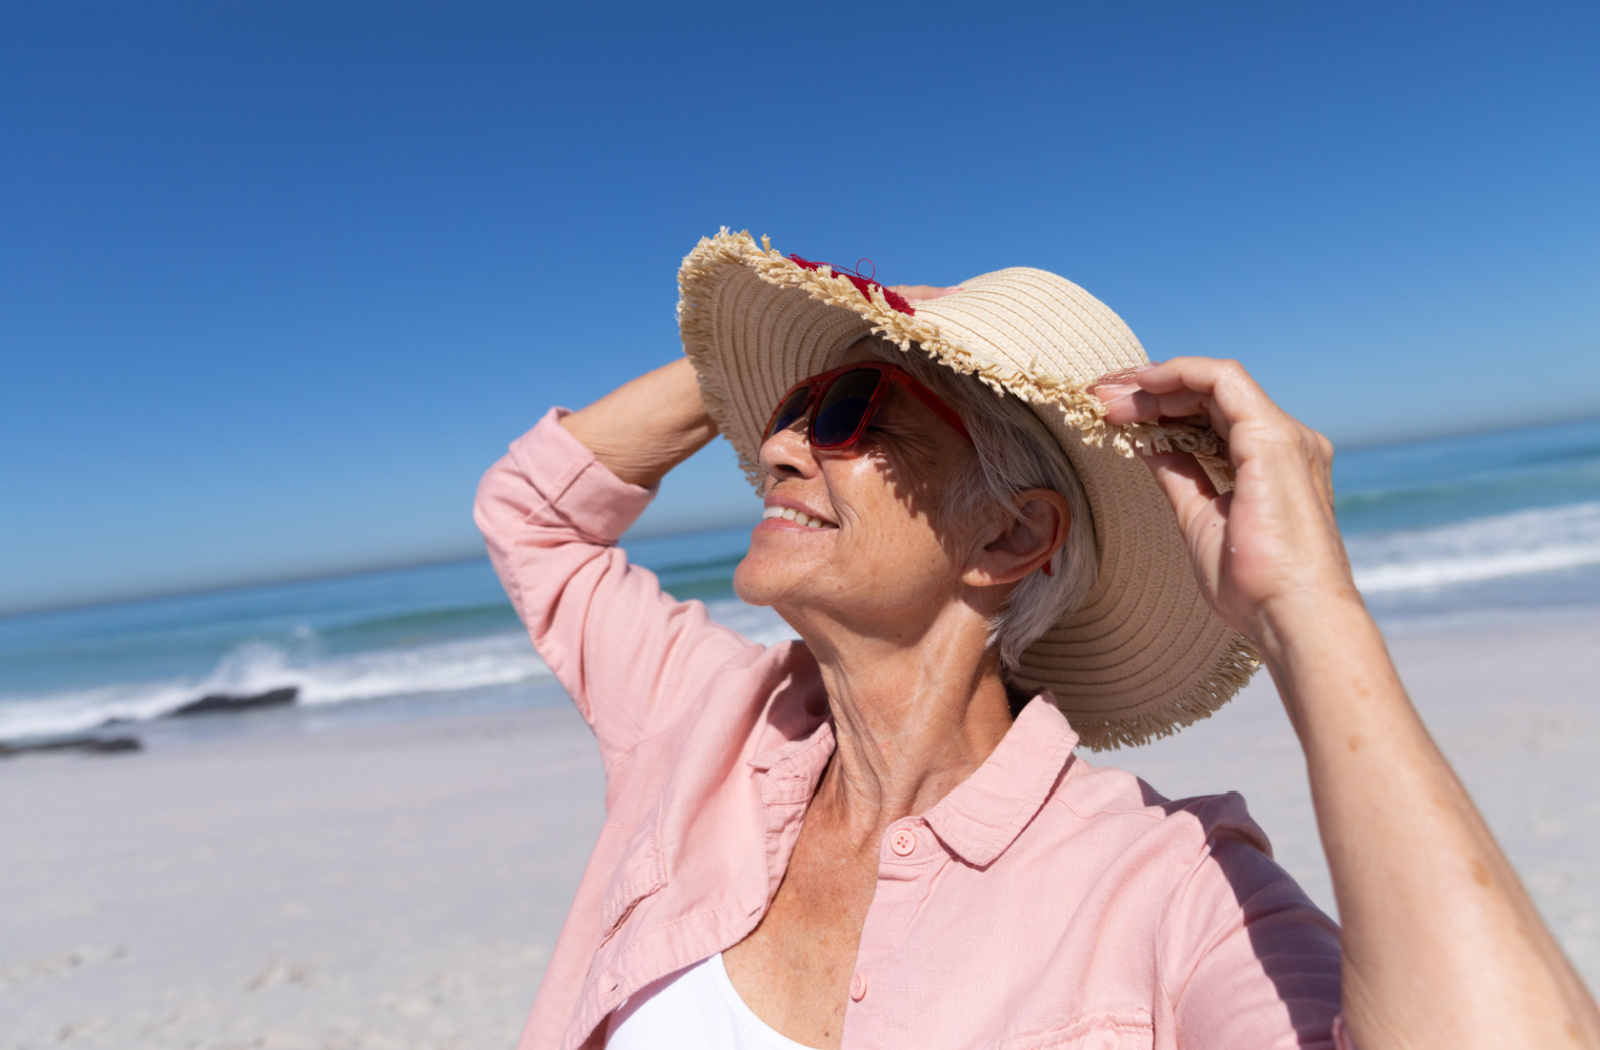 A senior woman enjoying the beach while wearing a hat and sunglasses, smiling with sea in the background.